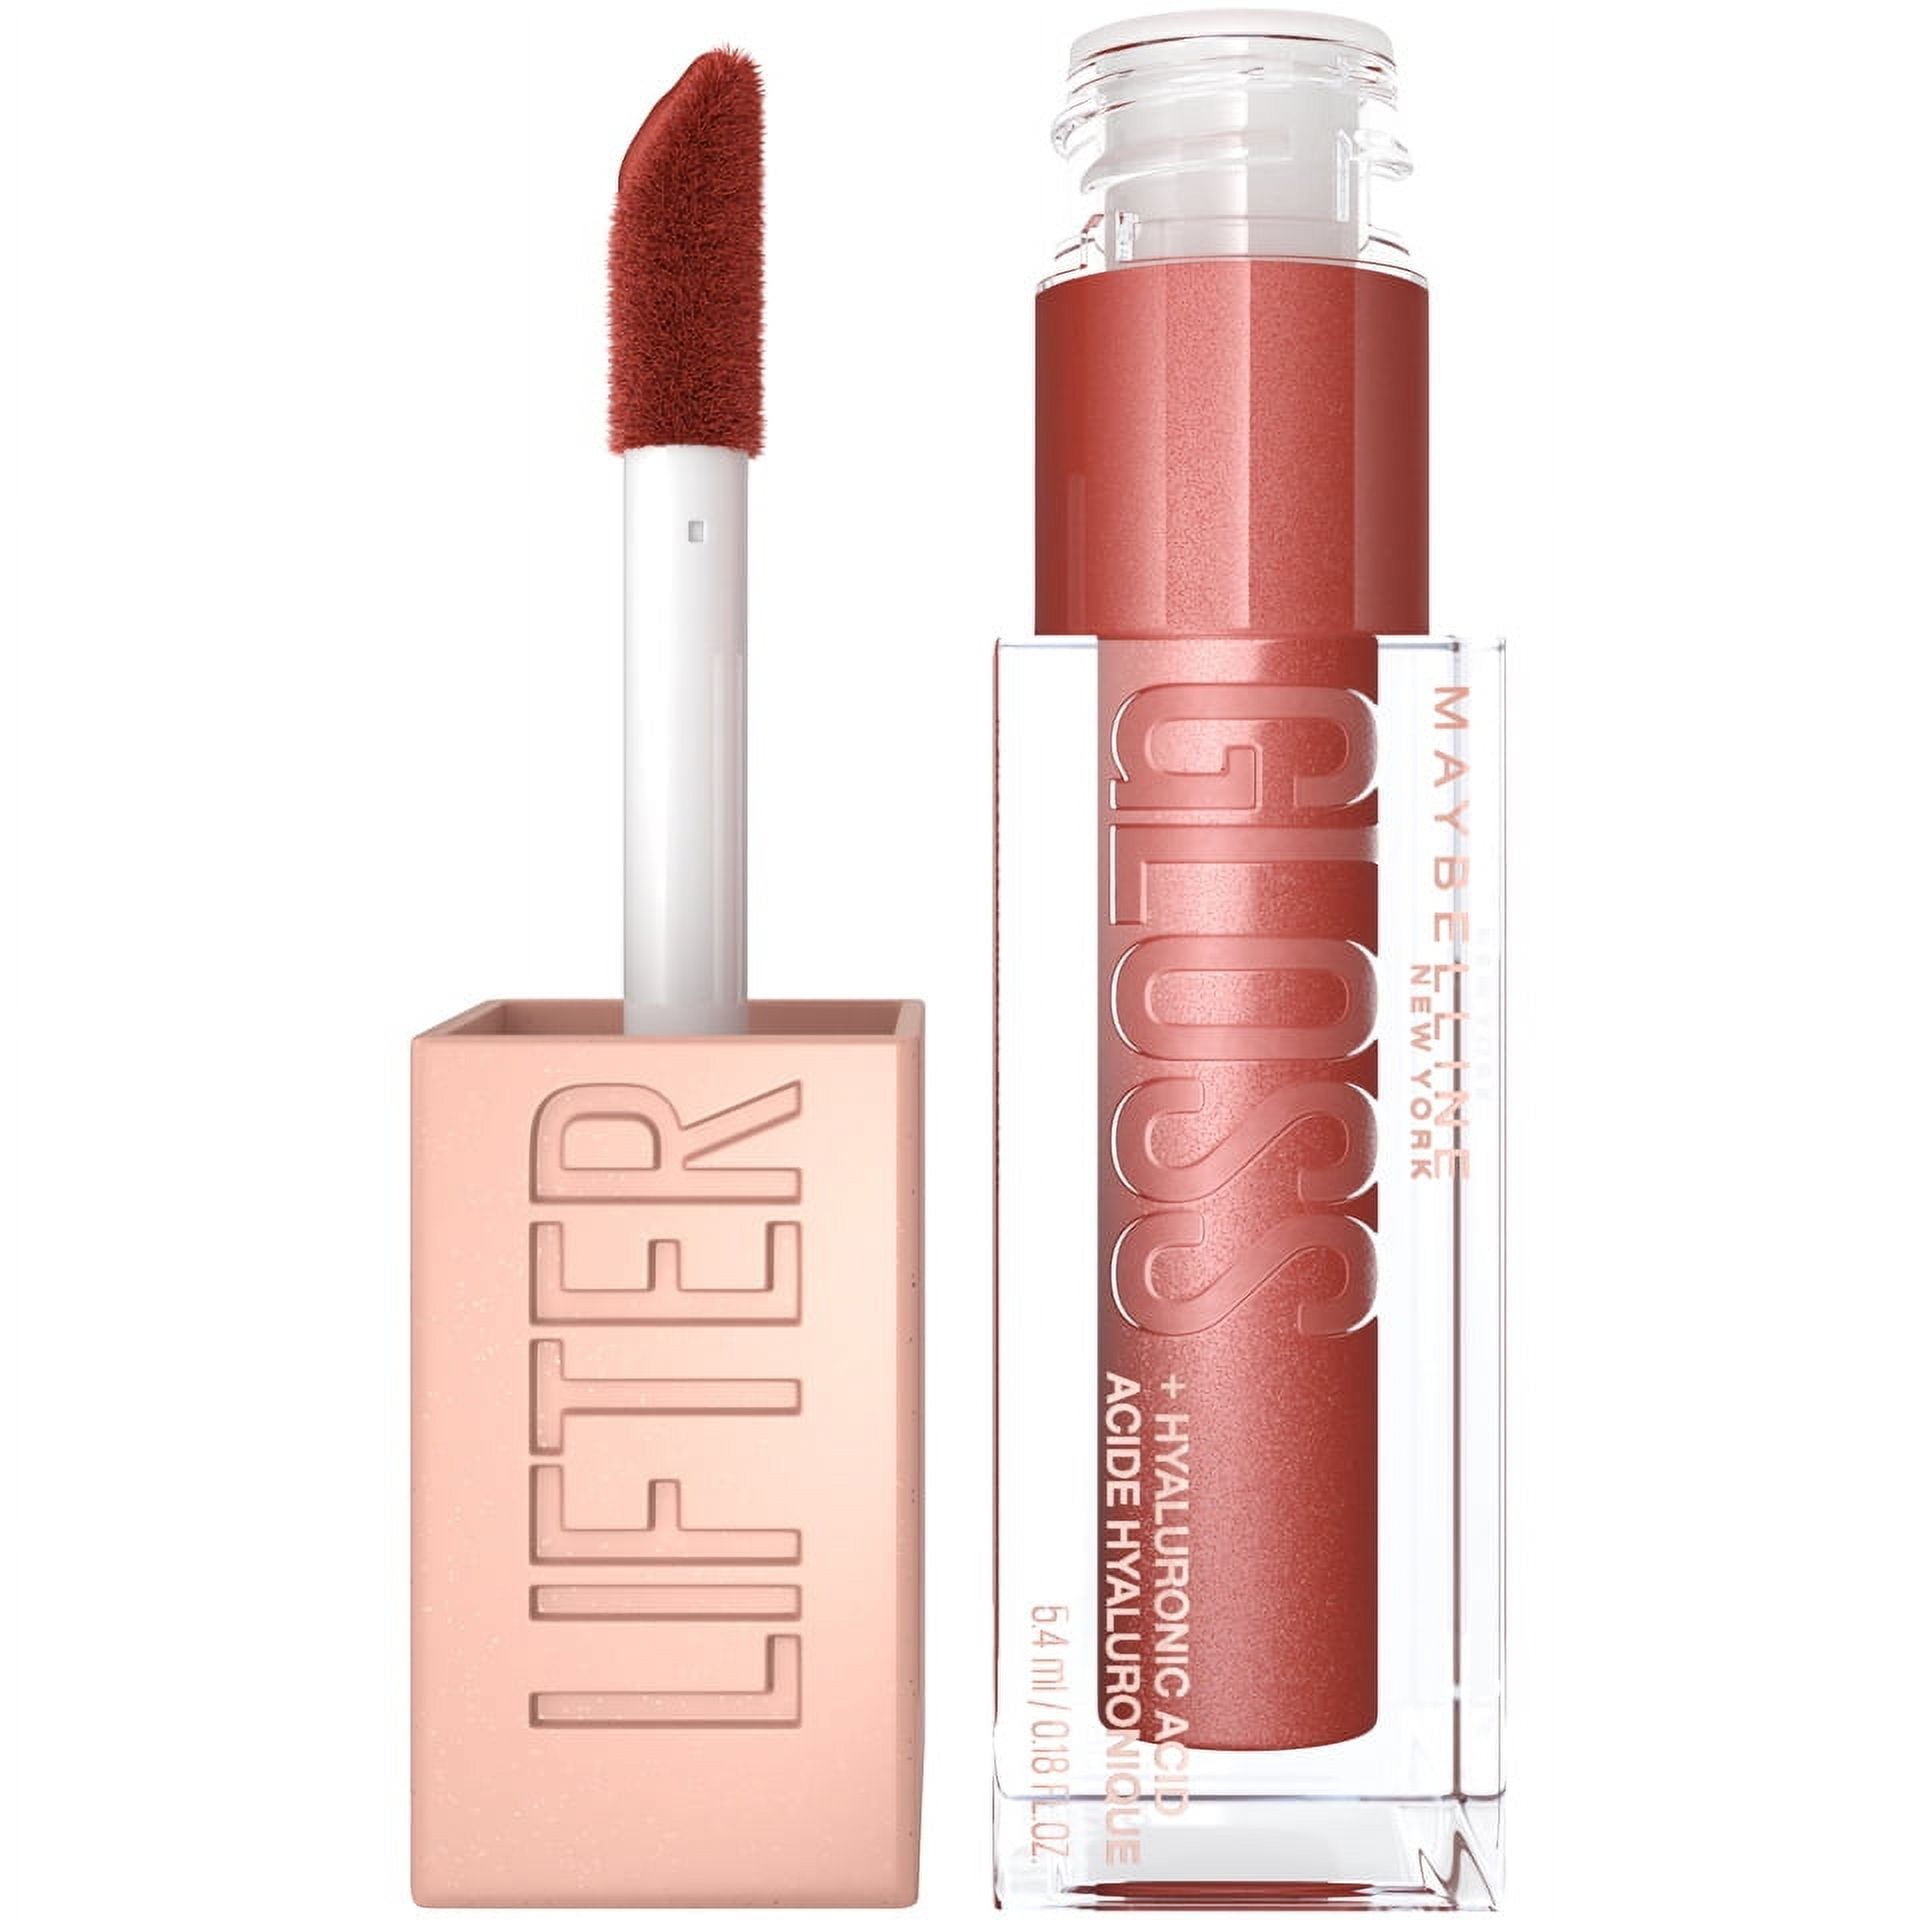 Maybelline Lifter Gloss Lip Gloss Makeup with Hyaluronic Acid, Amber